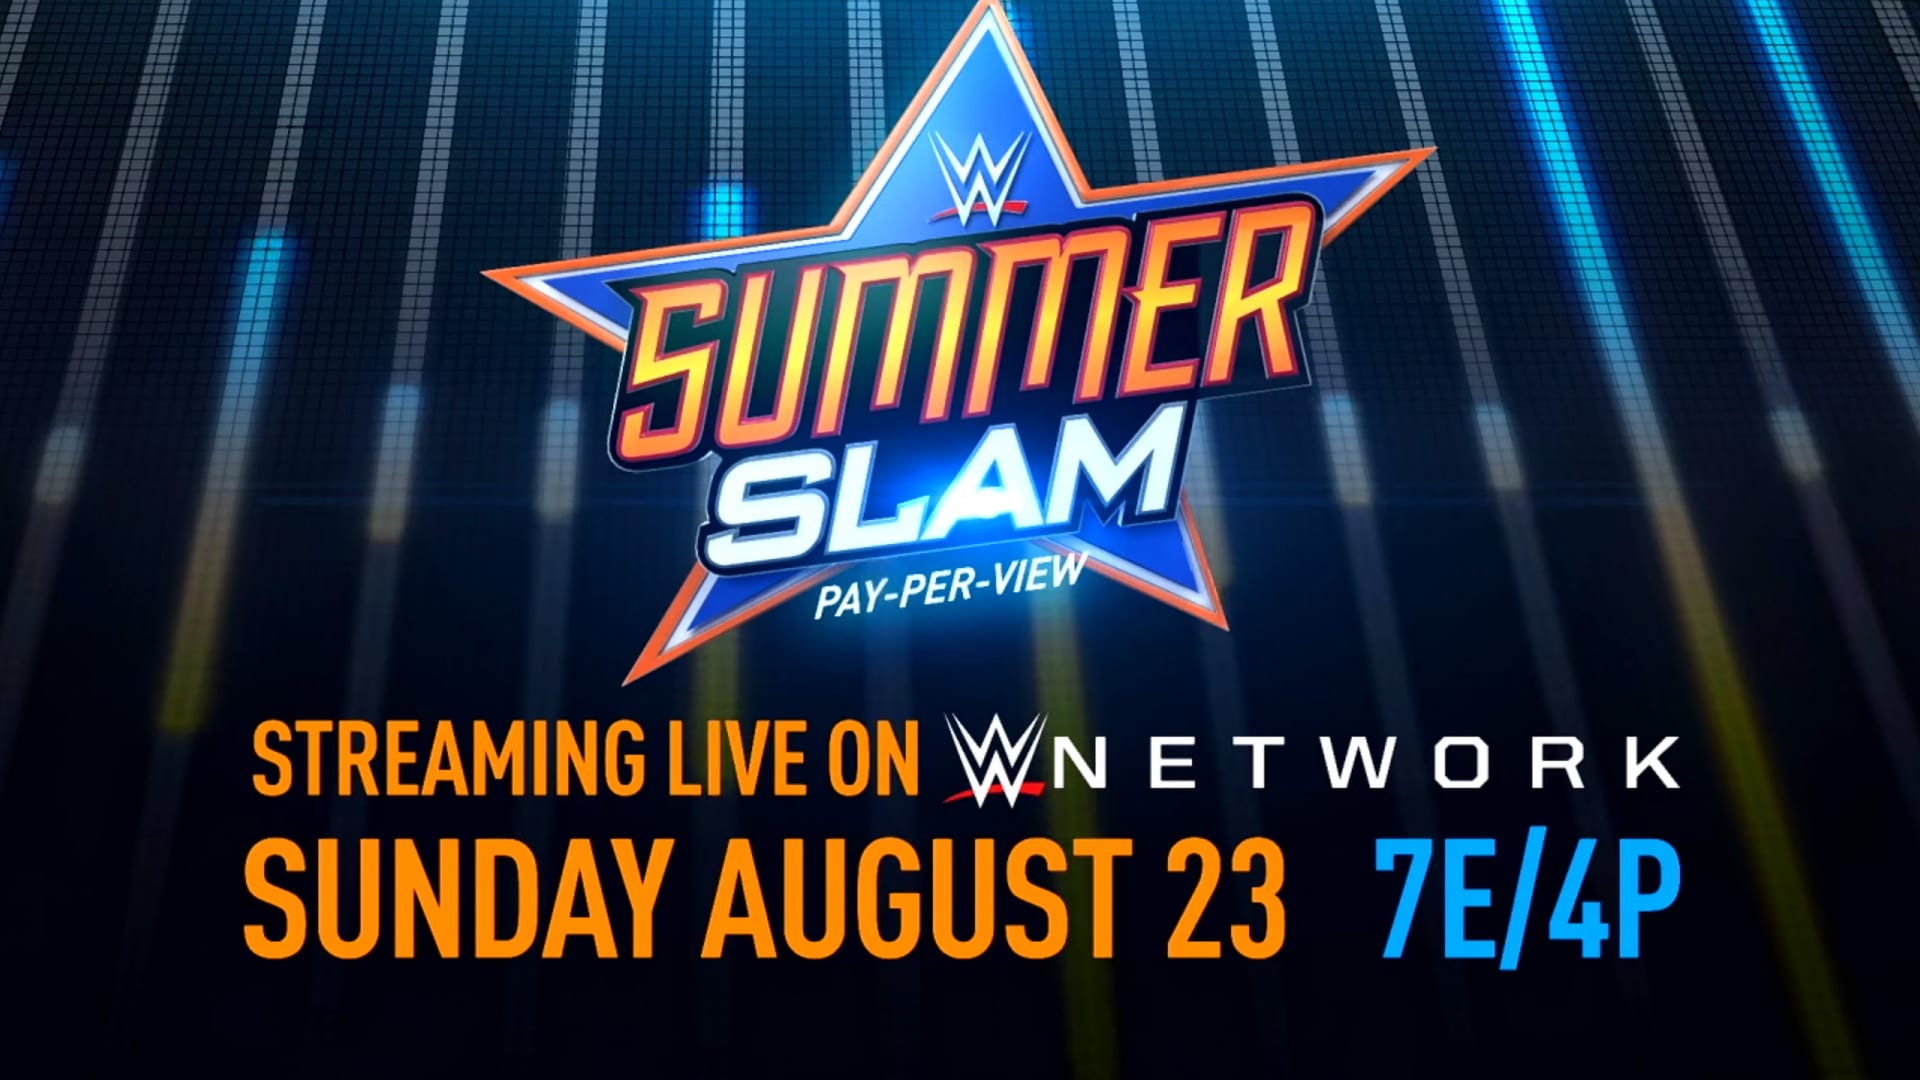 WWE SummerSlam Results for August 23, 2020